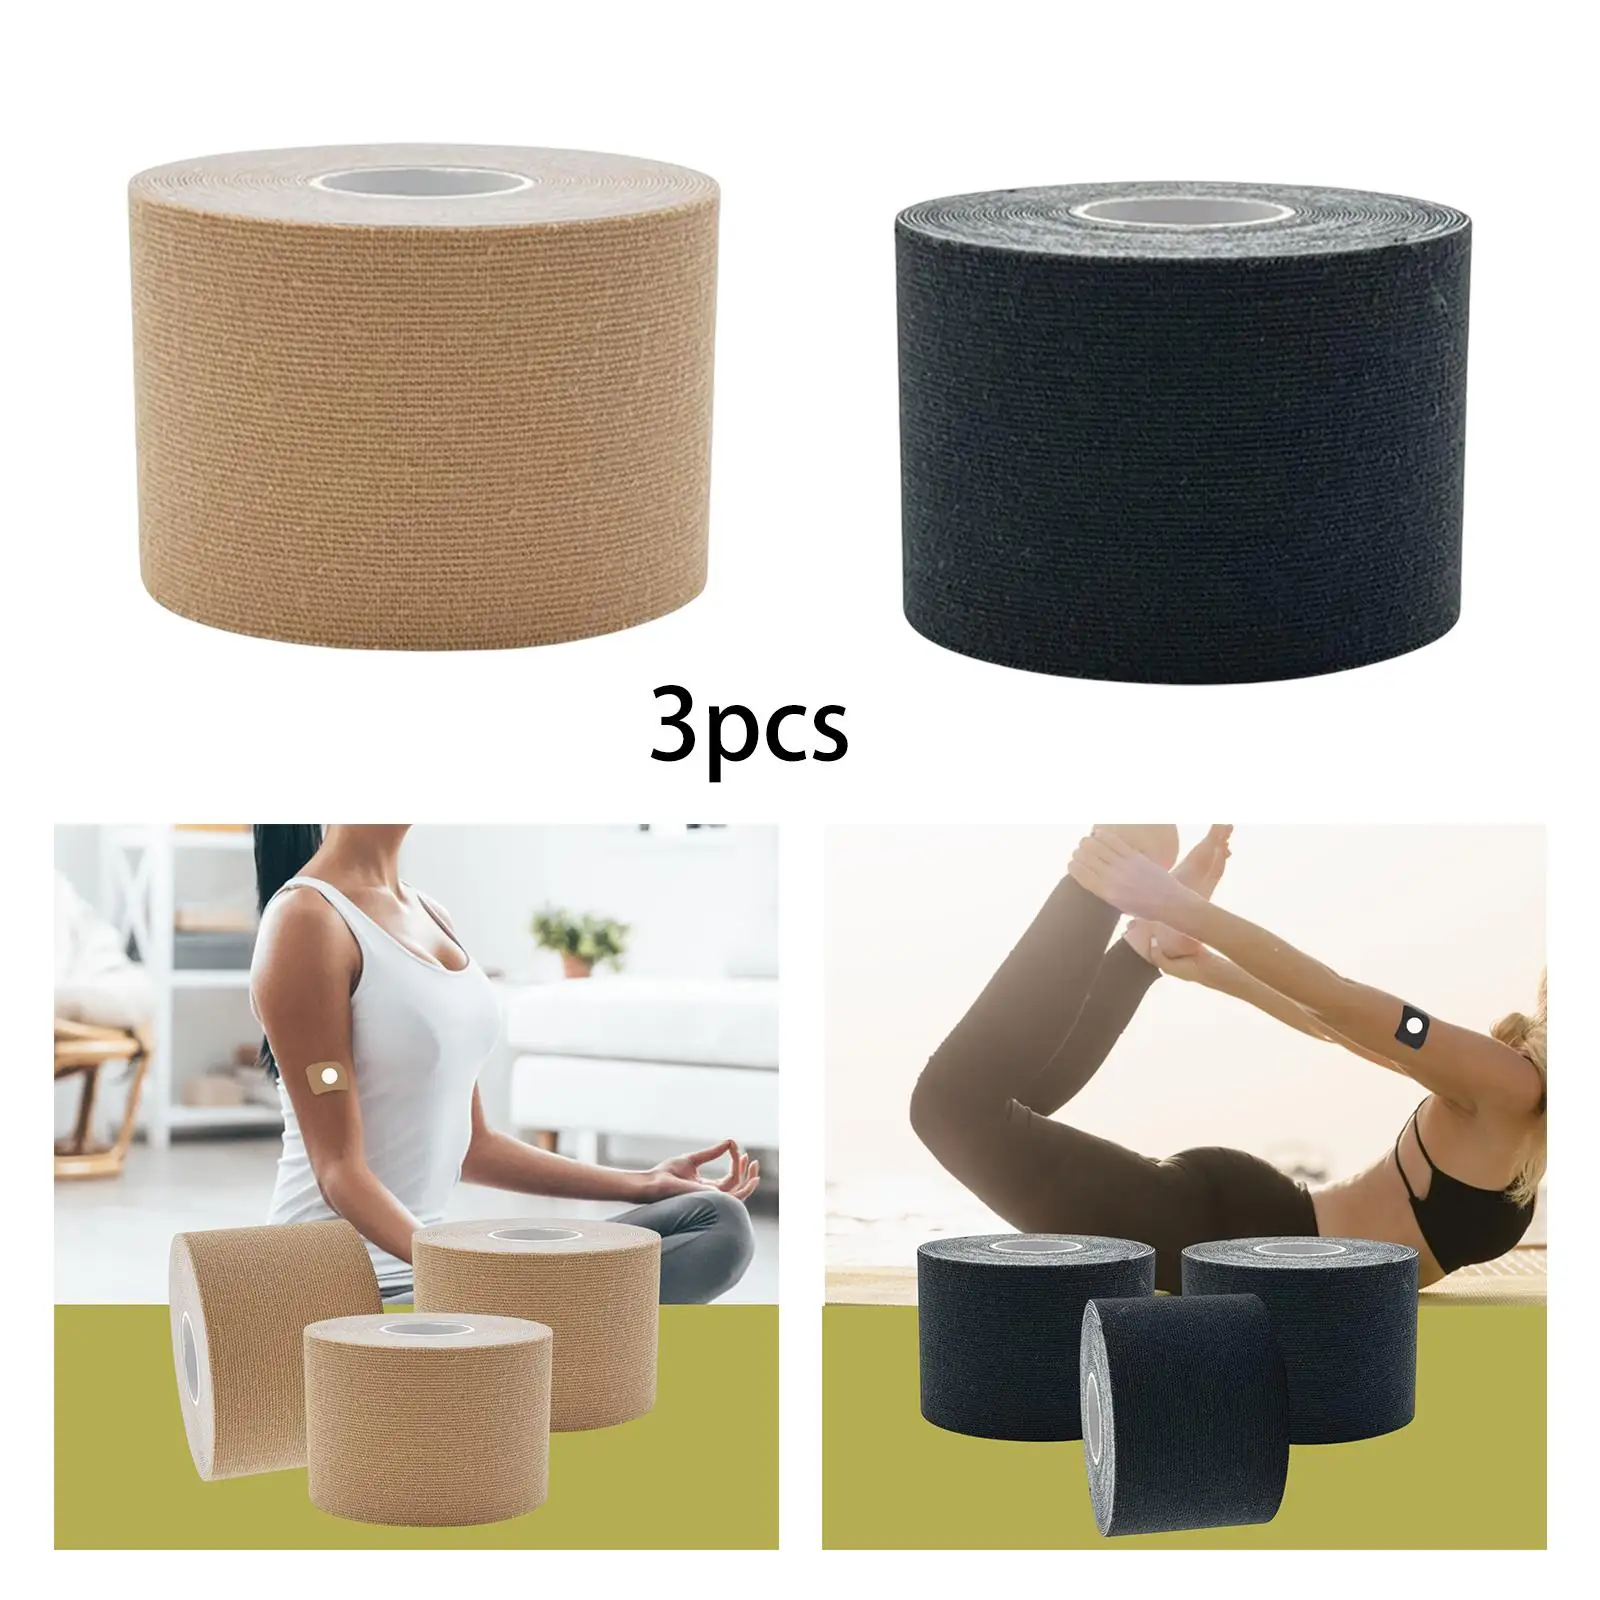 3Pcs 5M Tape for Sports, Muscle Tape, Elastic Breathable Lifting Tape,